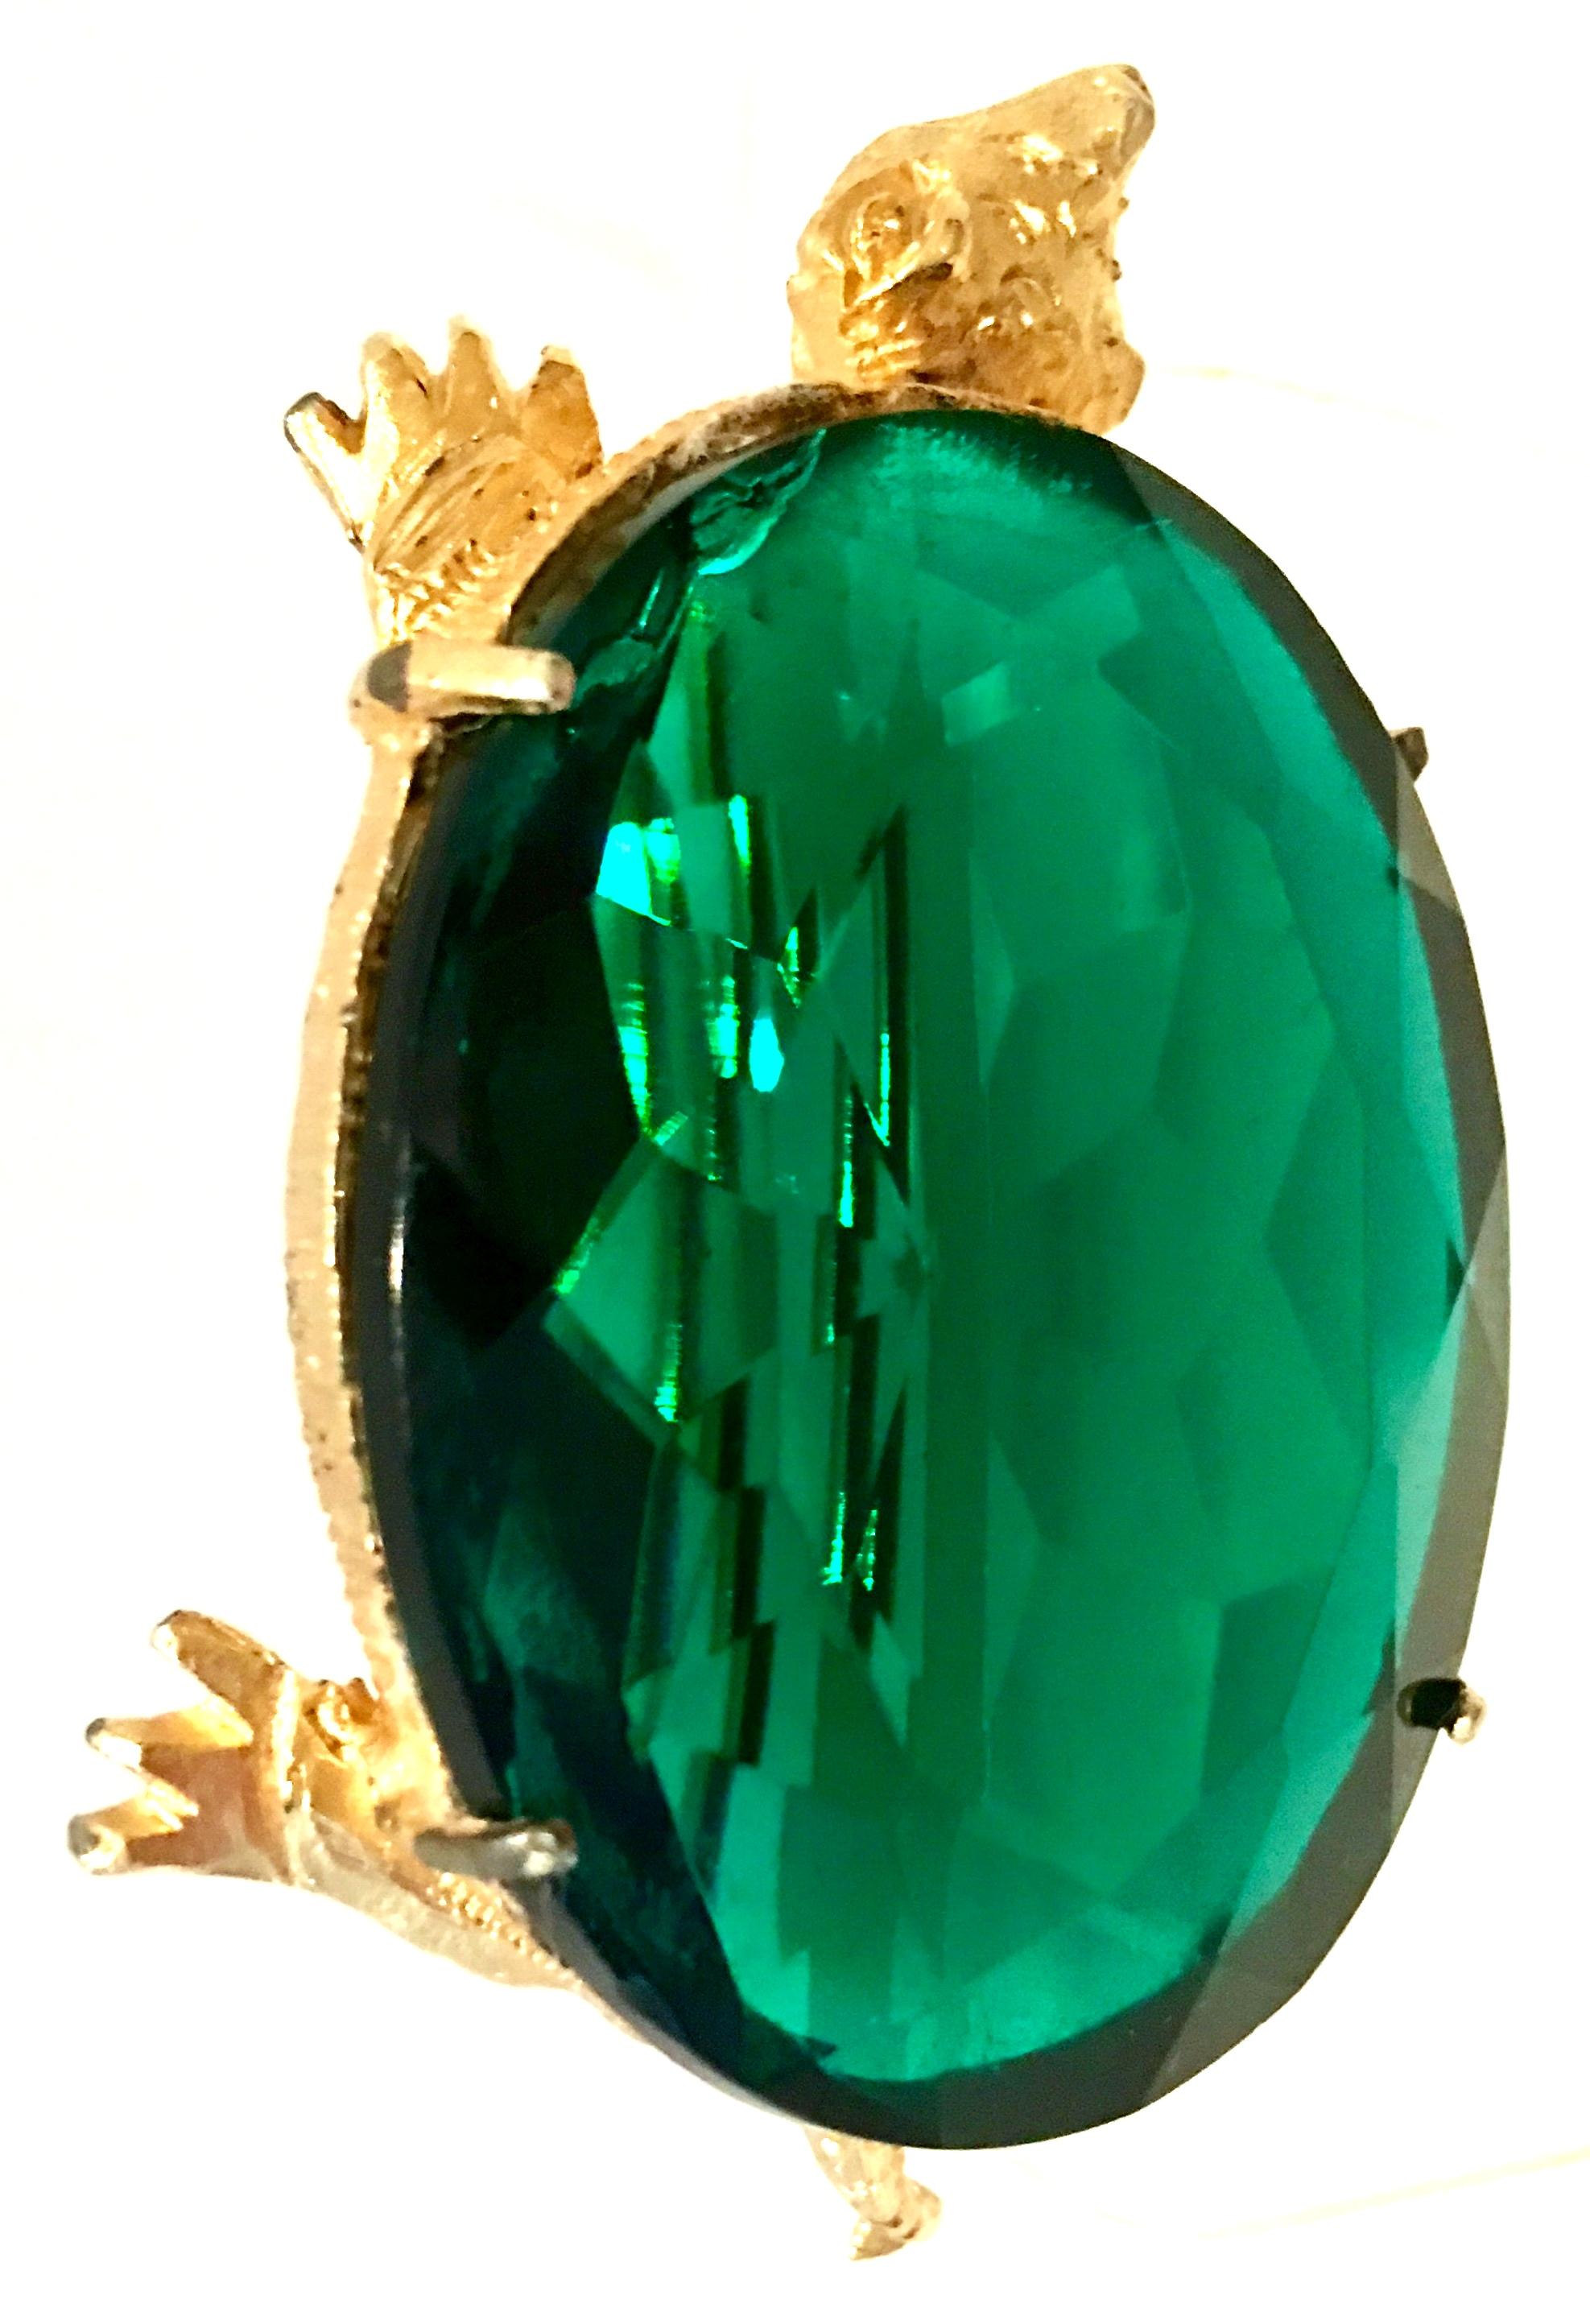 20th Century Gold Plate & Emerald Cut And Faceted Glass Prong Set Turtle Brooch-Signed. with a patent number. The brilliant cut and faceted emerald glass stone is approximately 1.65